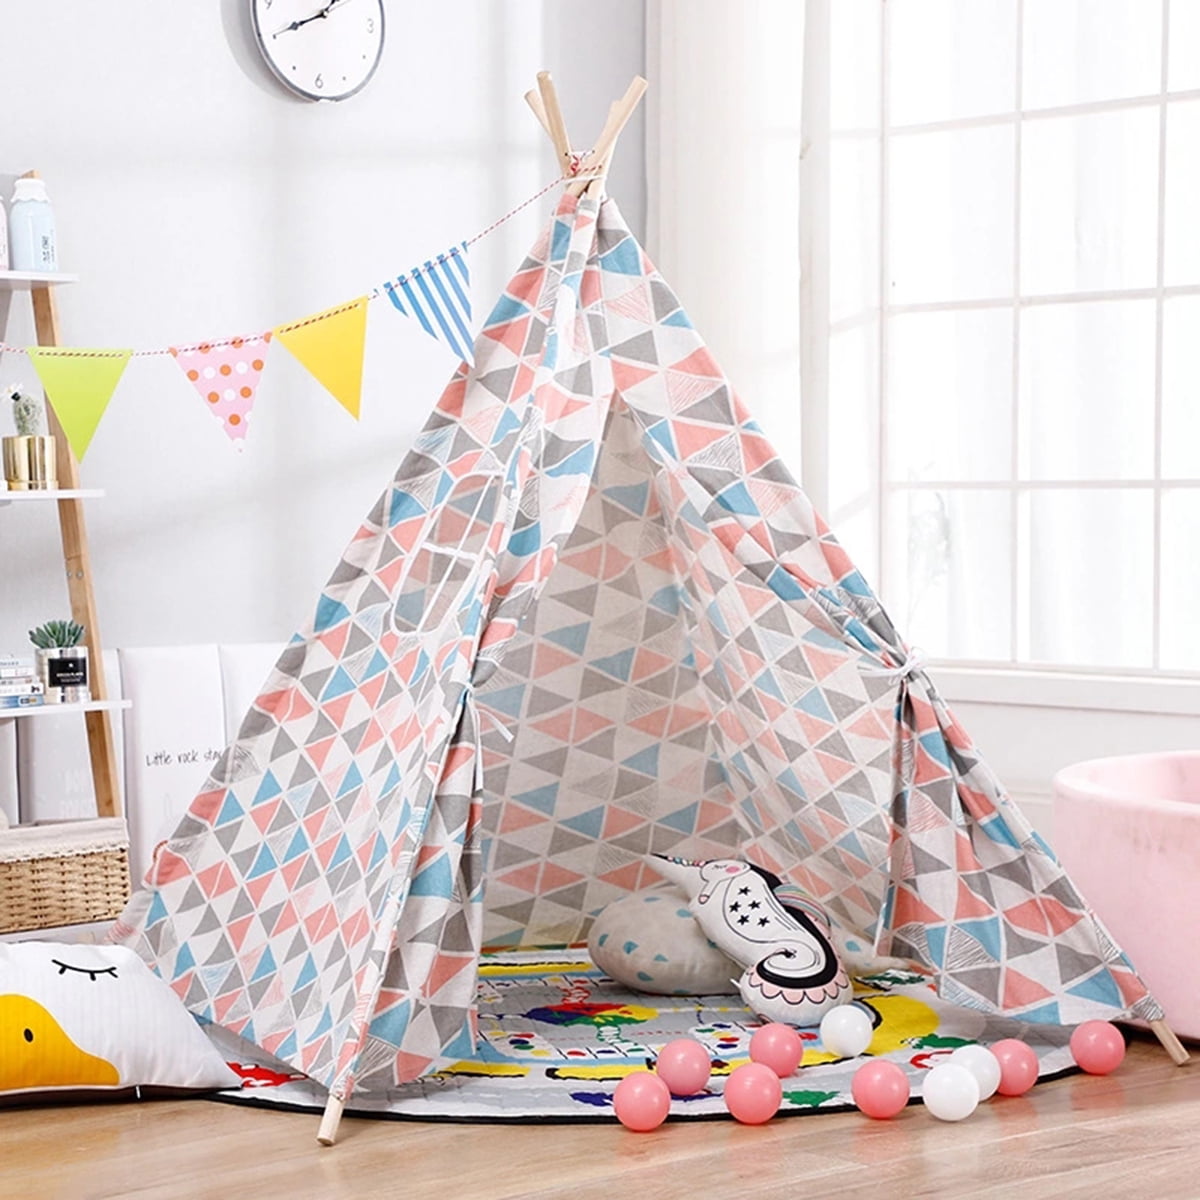 Kids Will Love This Playhouse 160cm Tall Perfect Wigwam for Adventures Childrens Teepee Play Tent with Floor Mat Stunning White with Grey Hearts Pattern 100% Cotton